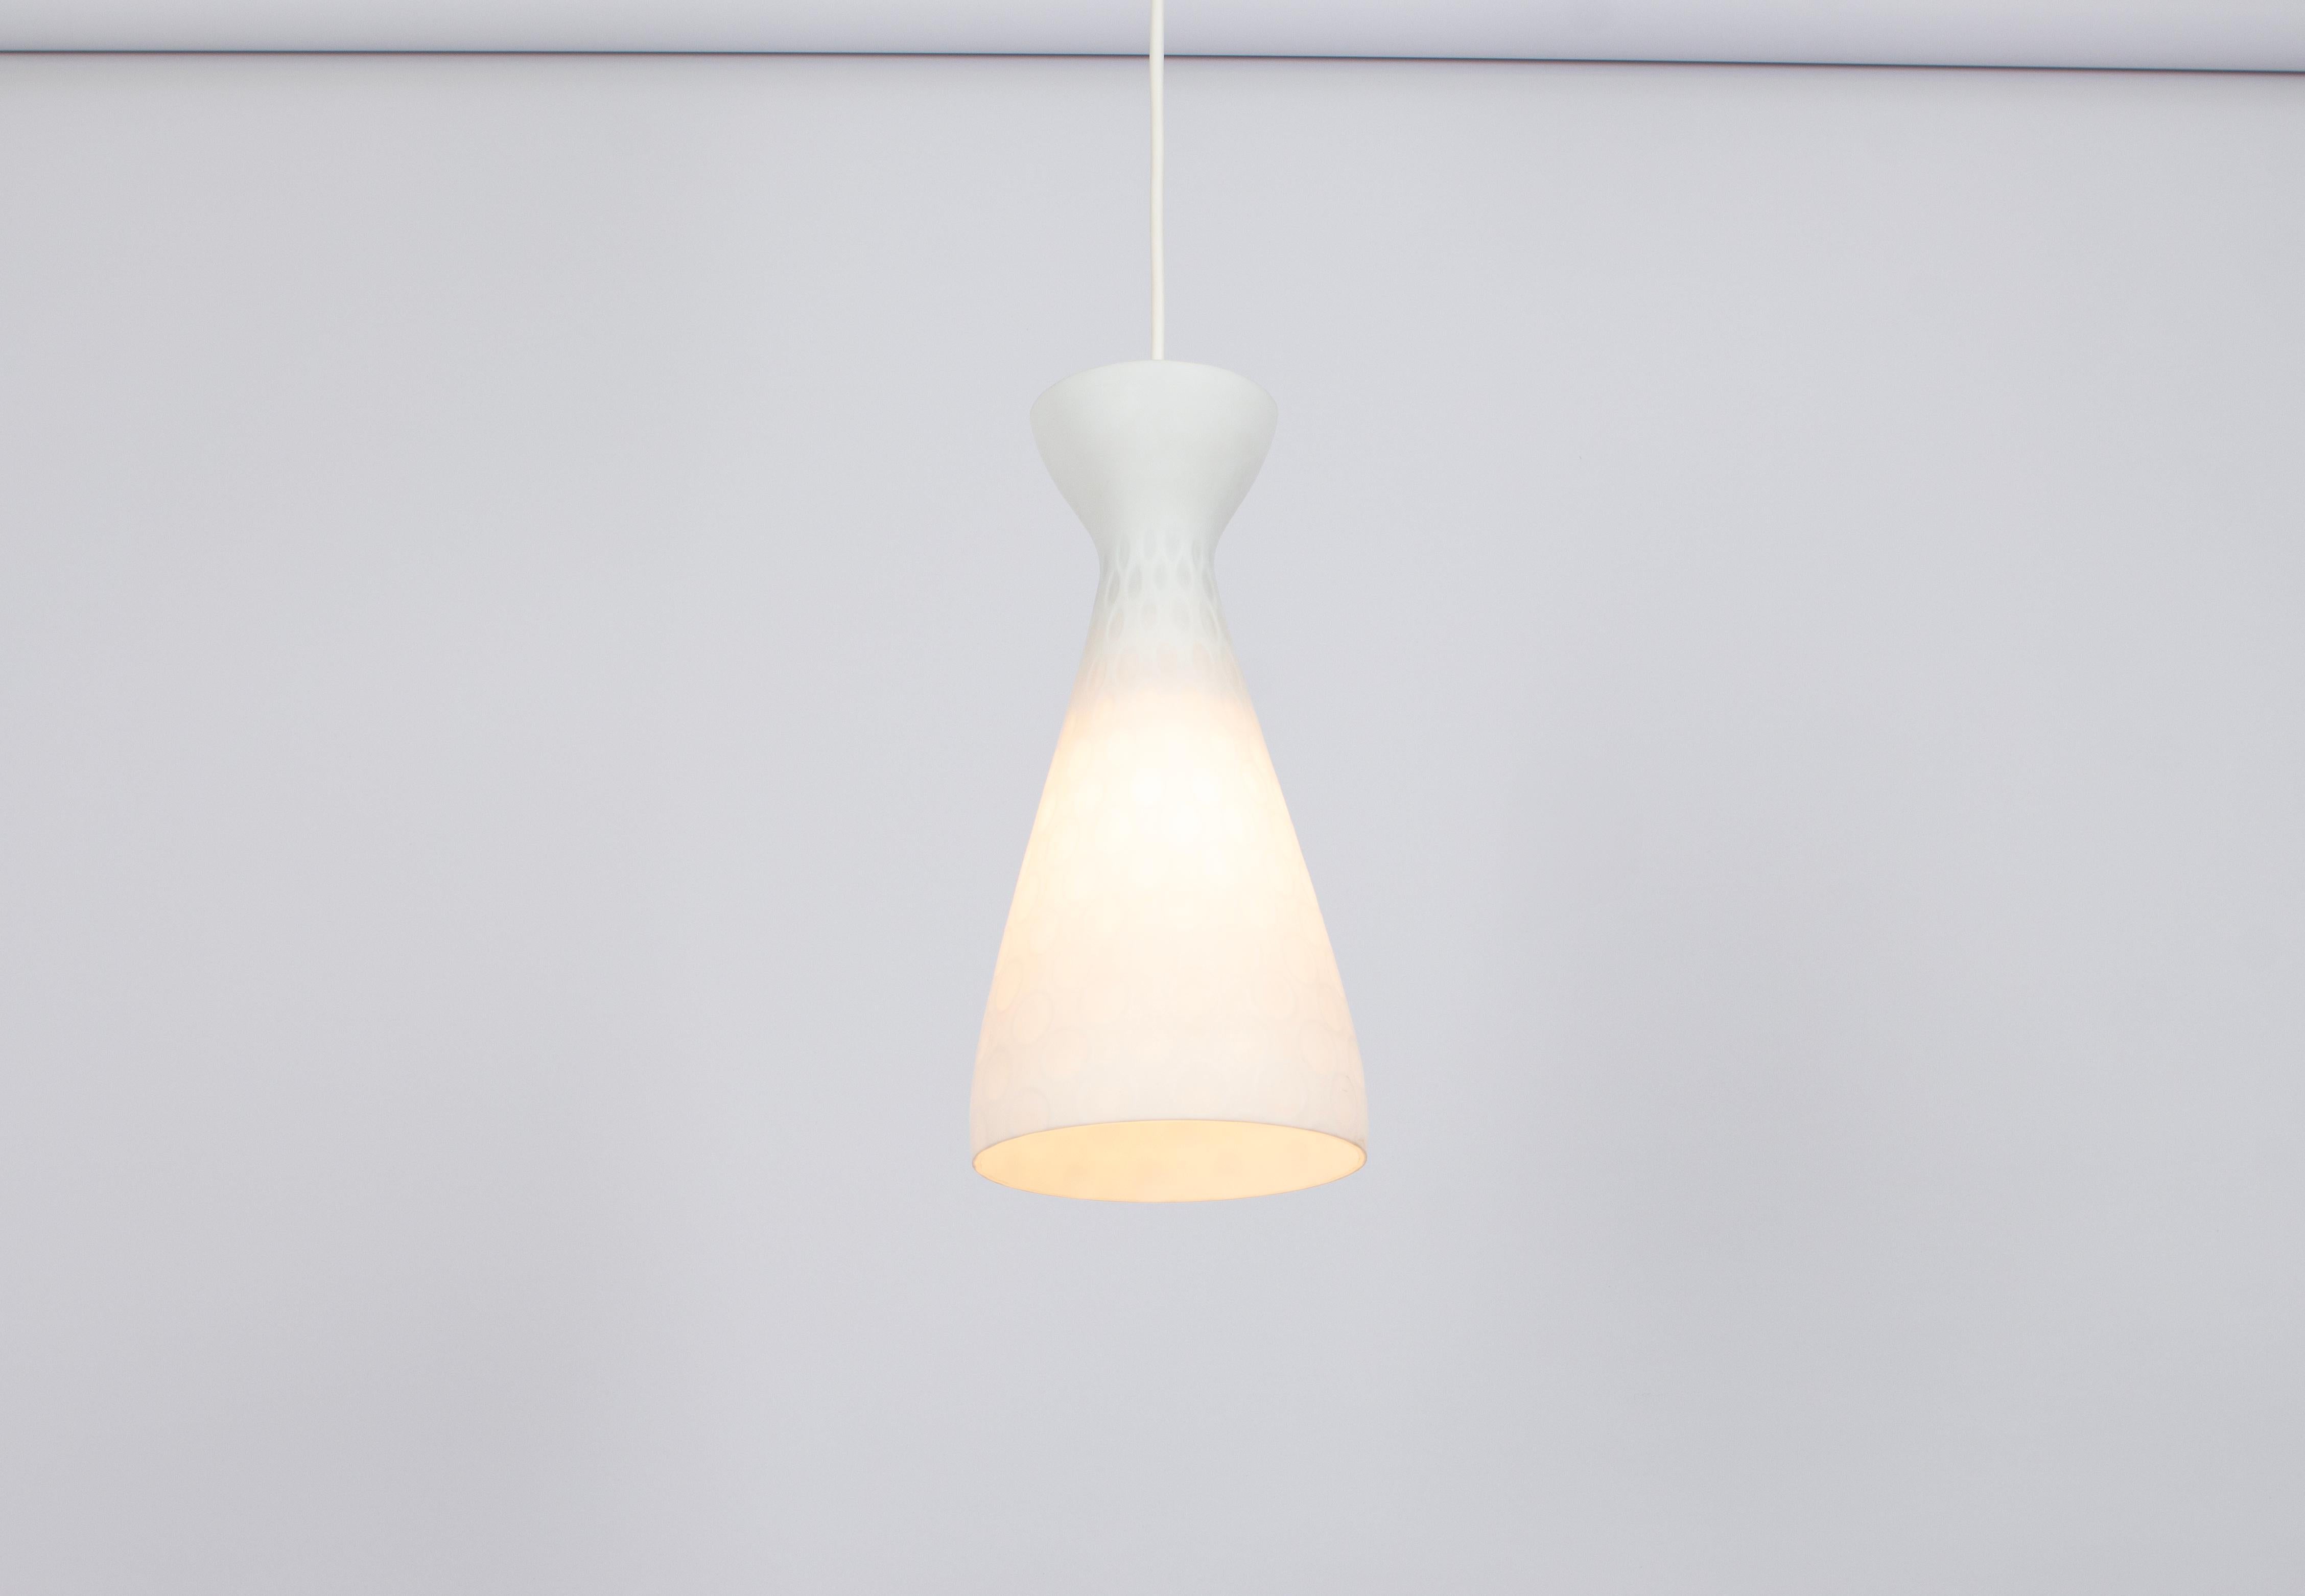 1 of 2 Petite Pendant Lights by Gangkofner, Peill & Putzler, Germany, 1950s For Sale 1